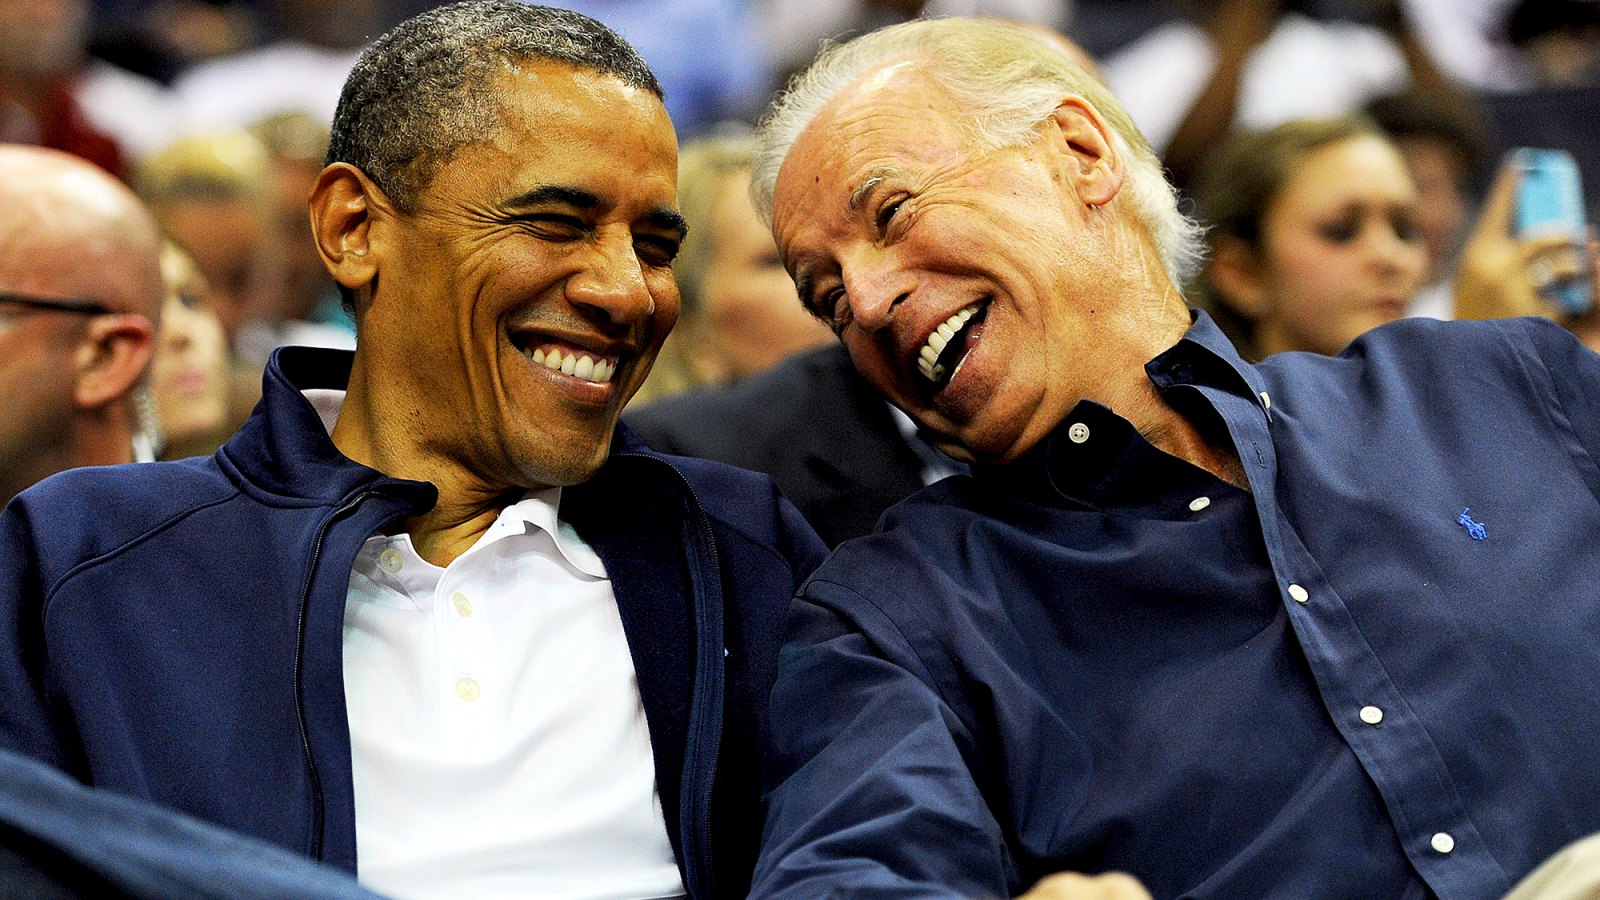 Barack Obama and Joe Biden attend the pre-Olympic exhibition basketball game at the Verizon Center on July 16, 2012 in Washington, DC.